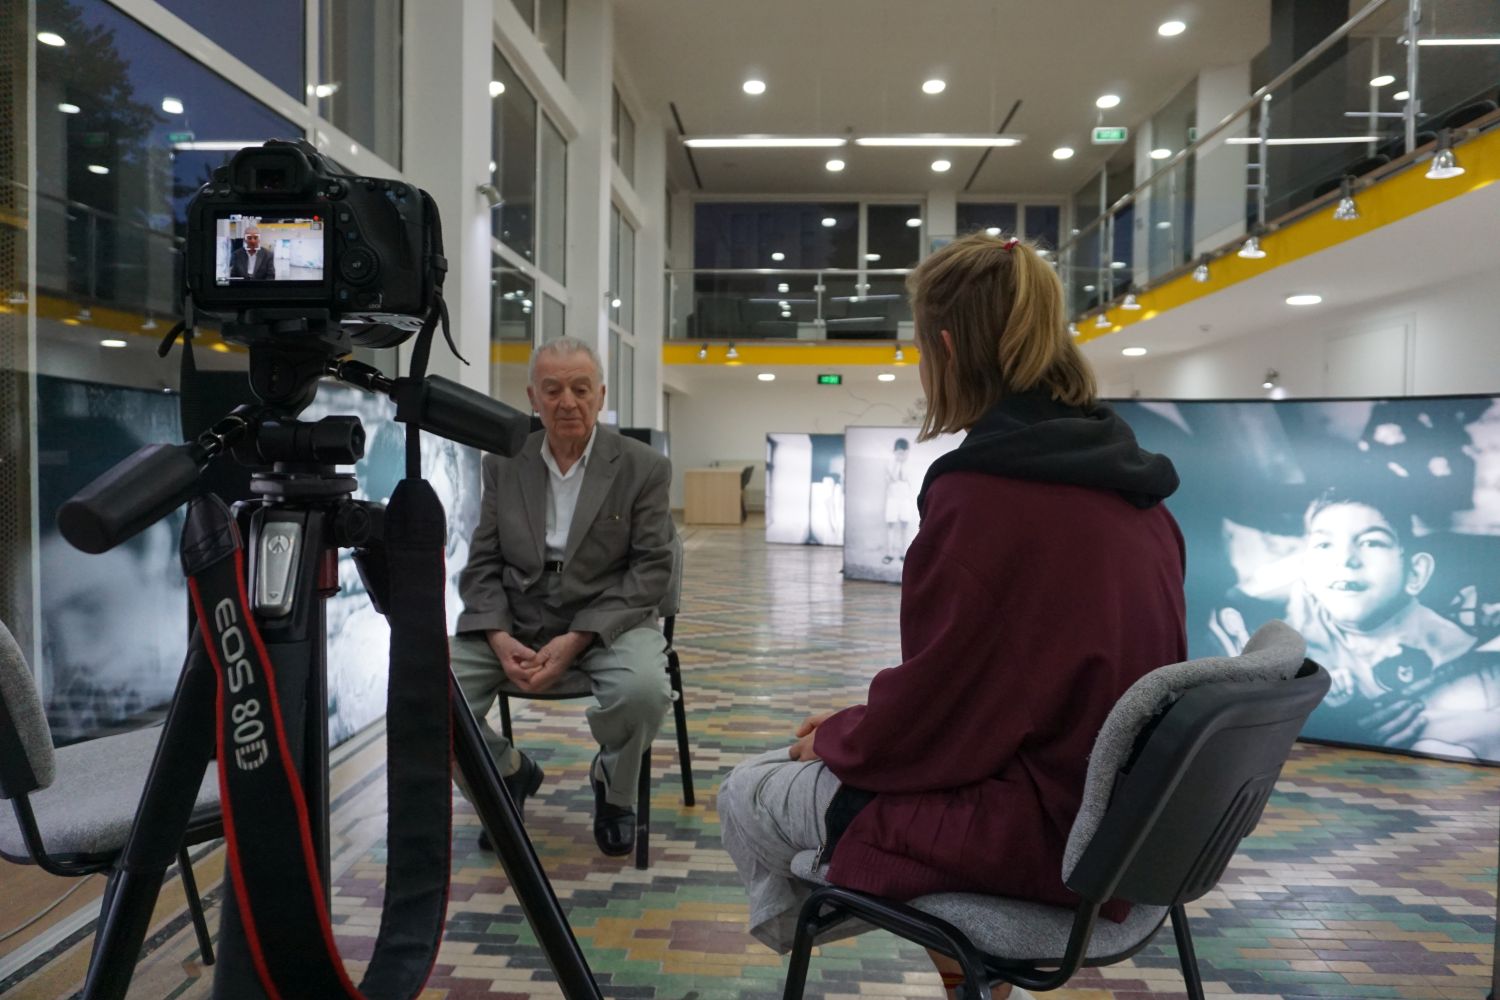 Vasilaq Orgocka being interviewed by Zuzanna Dobrzańska, the authors of the article, for the In Between? project in 2017